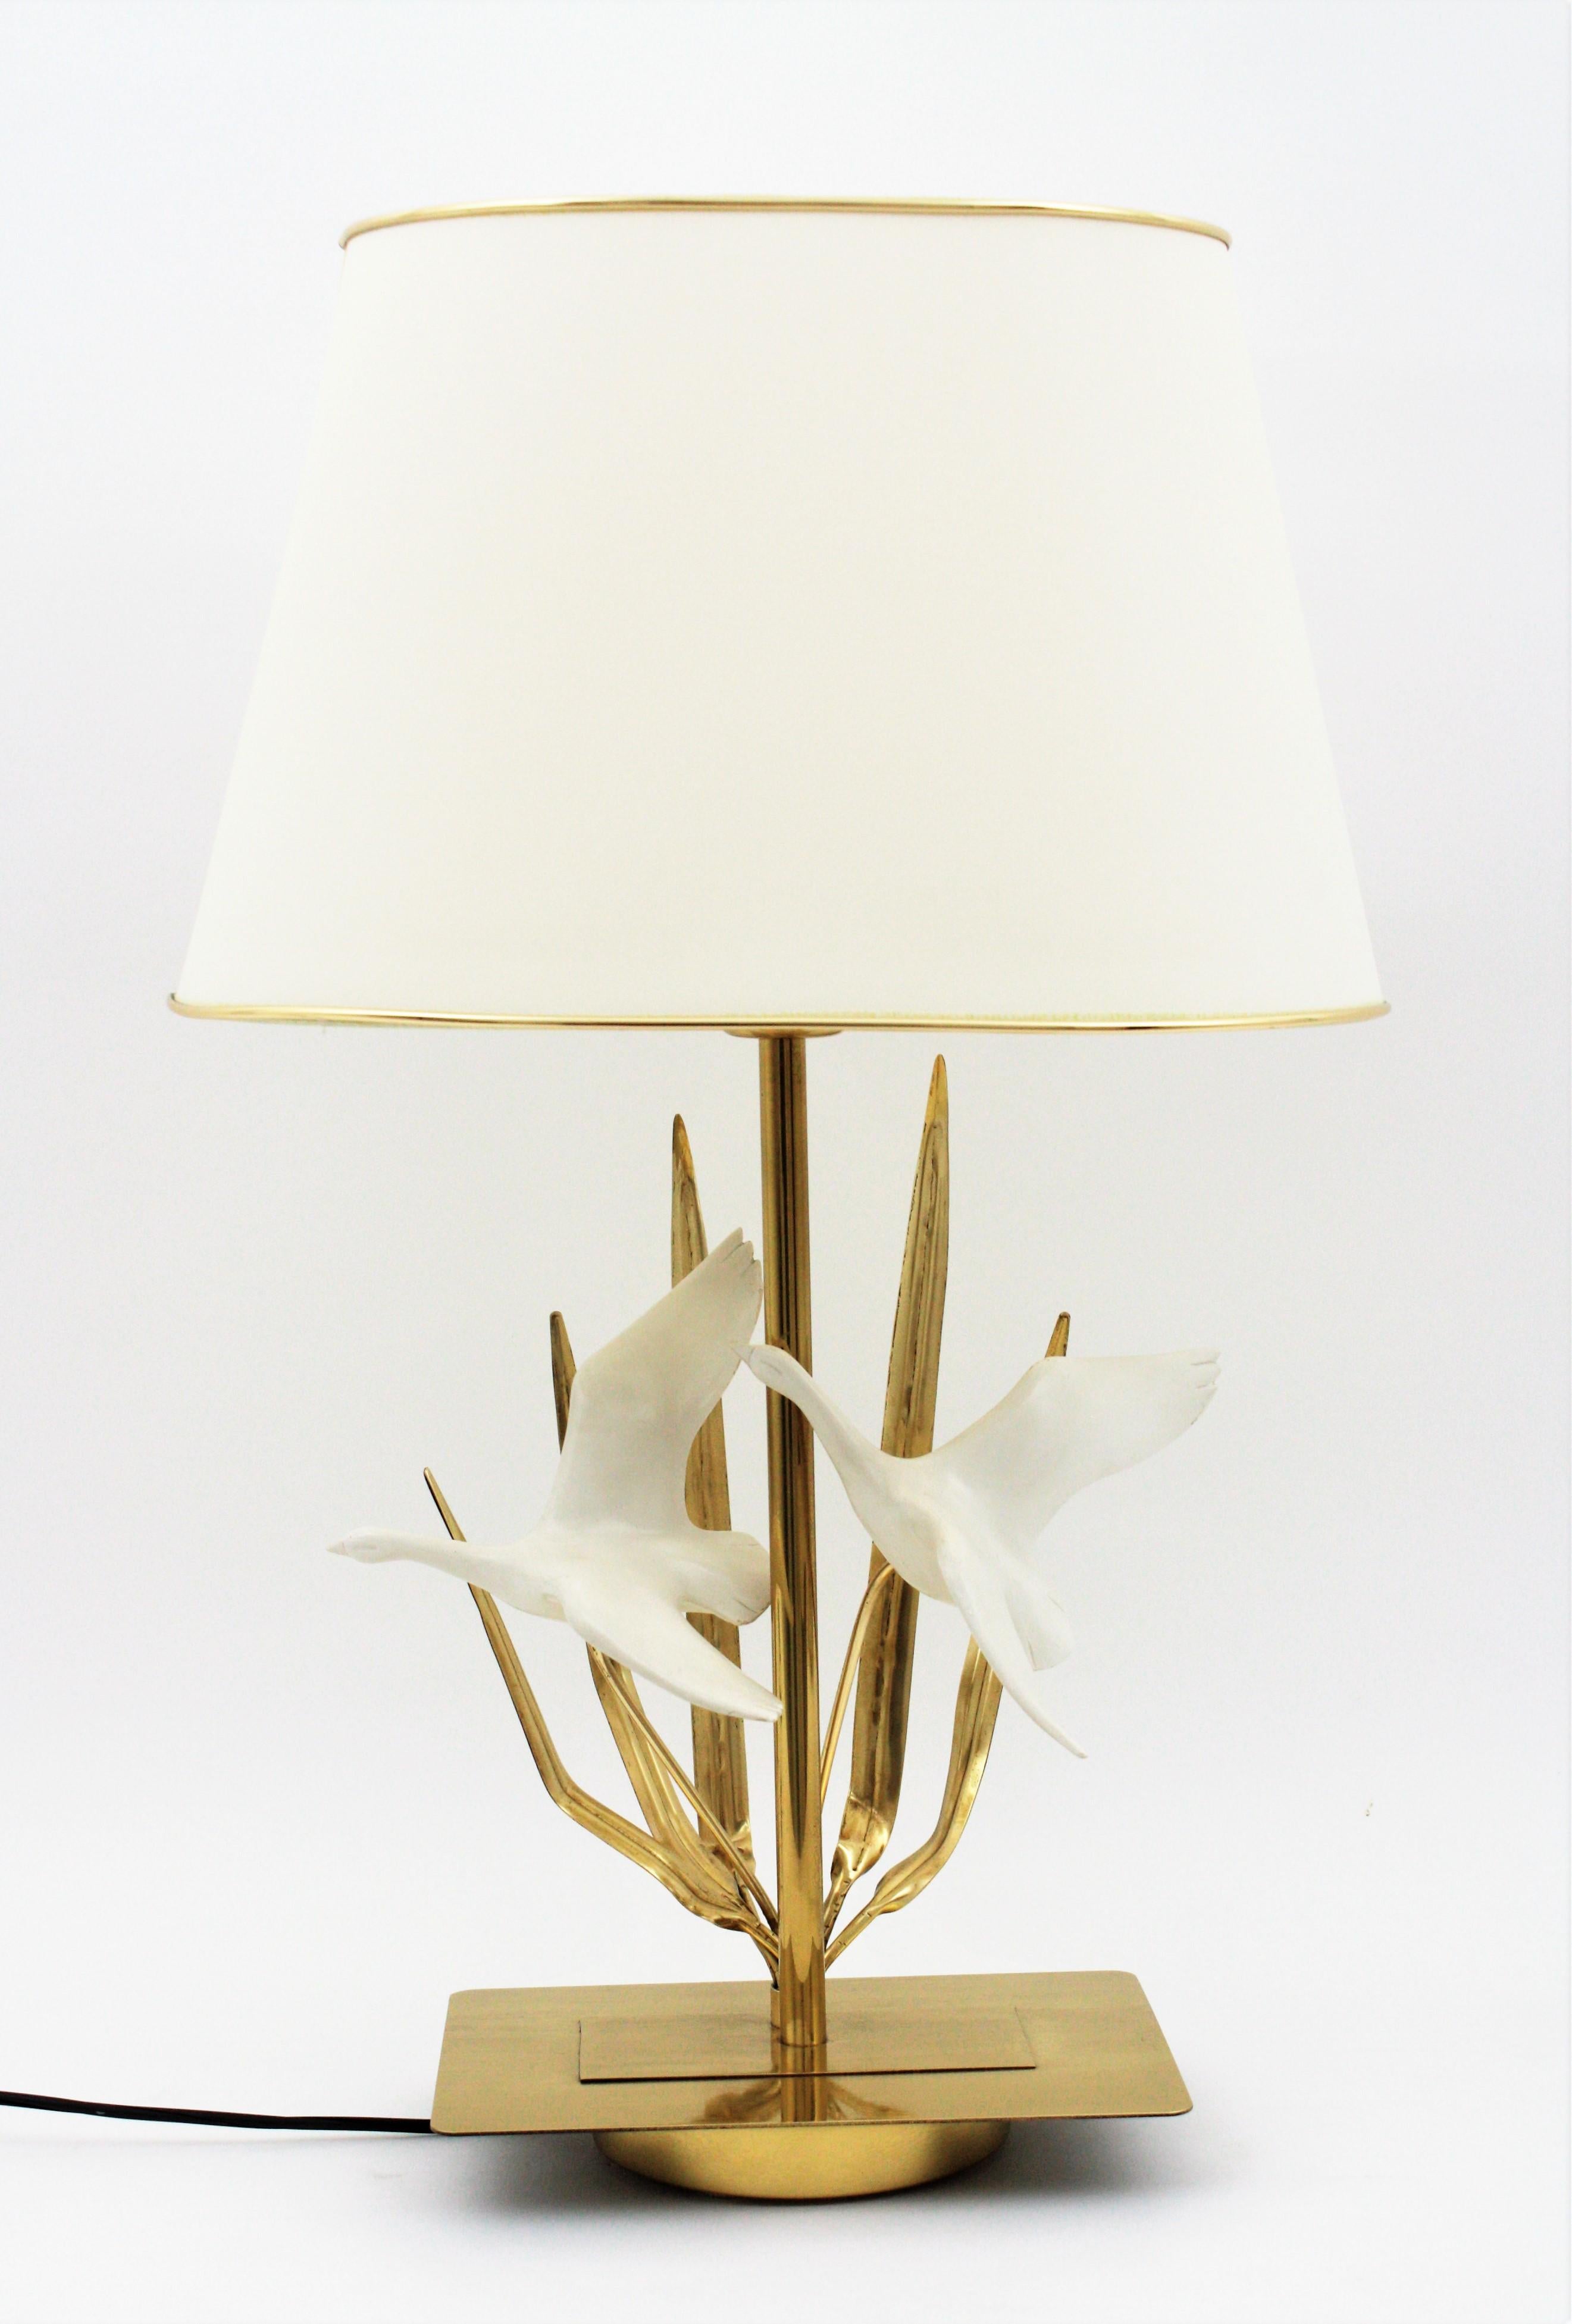 French Midcentury Brass Table Lamp with Flying Birds Motif For Sale 5